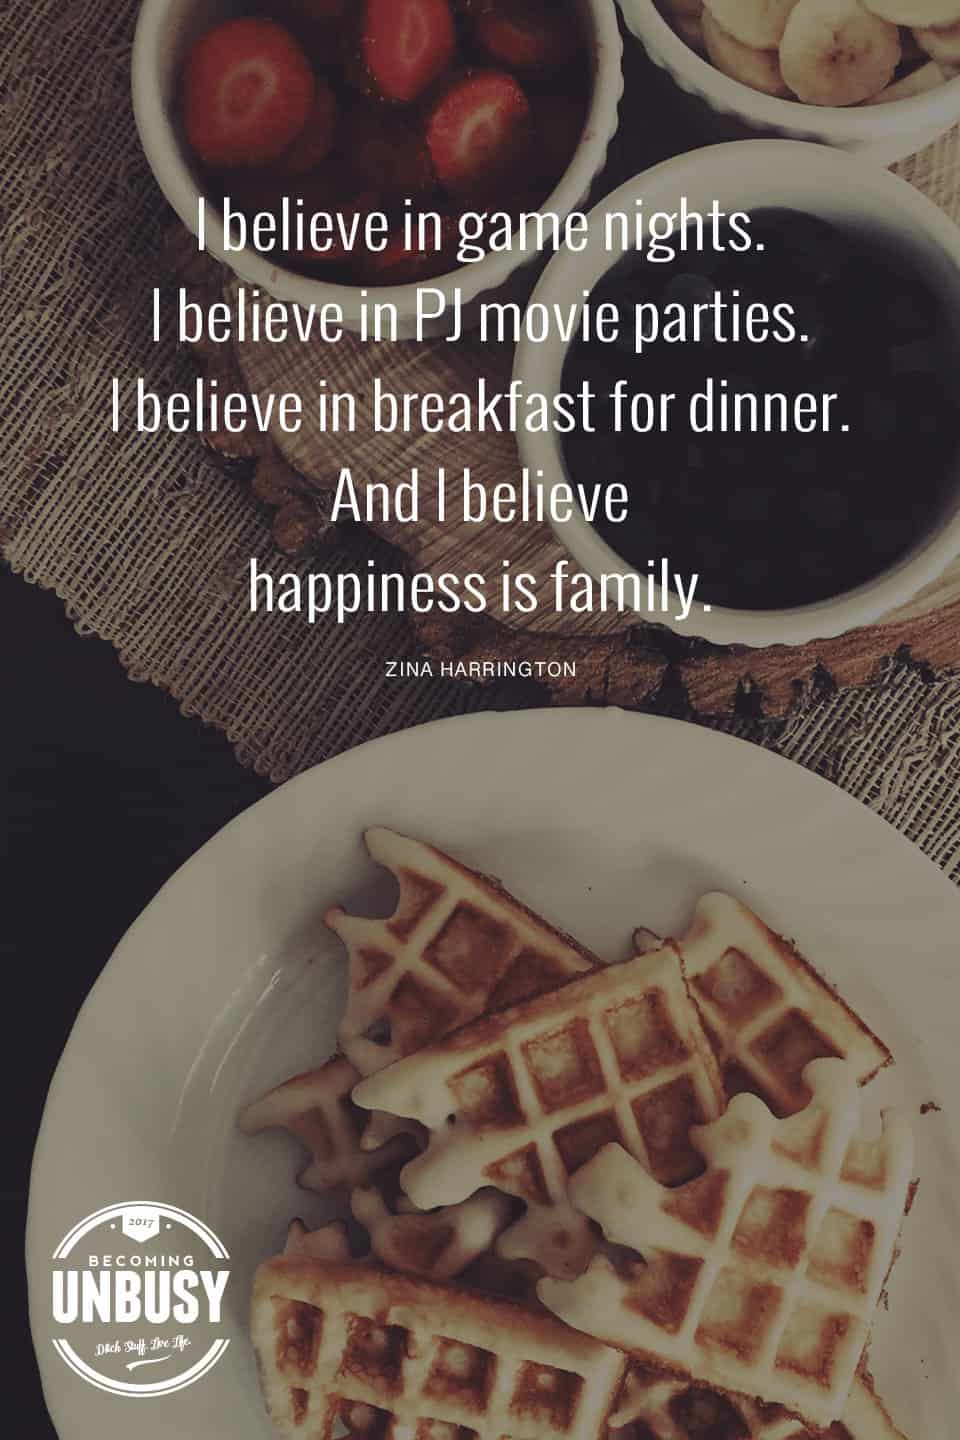 The following fall bucket list quote written over a photo of waffles and strawberries, "I believe in game nights. I believe in PJ movie parties. I believe in breakfast for dinner. And I believe happiness is family."